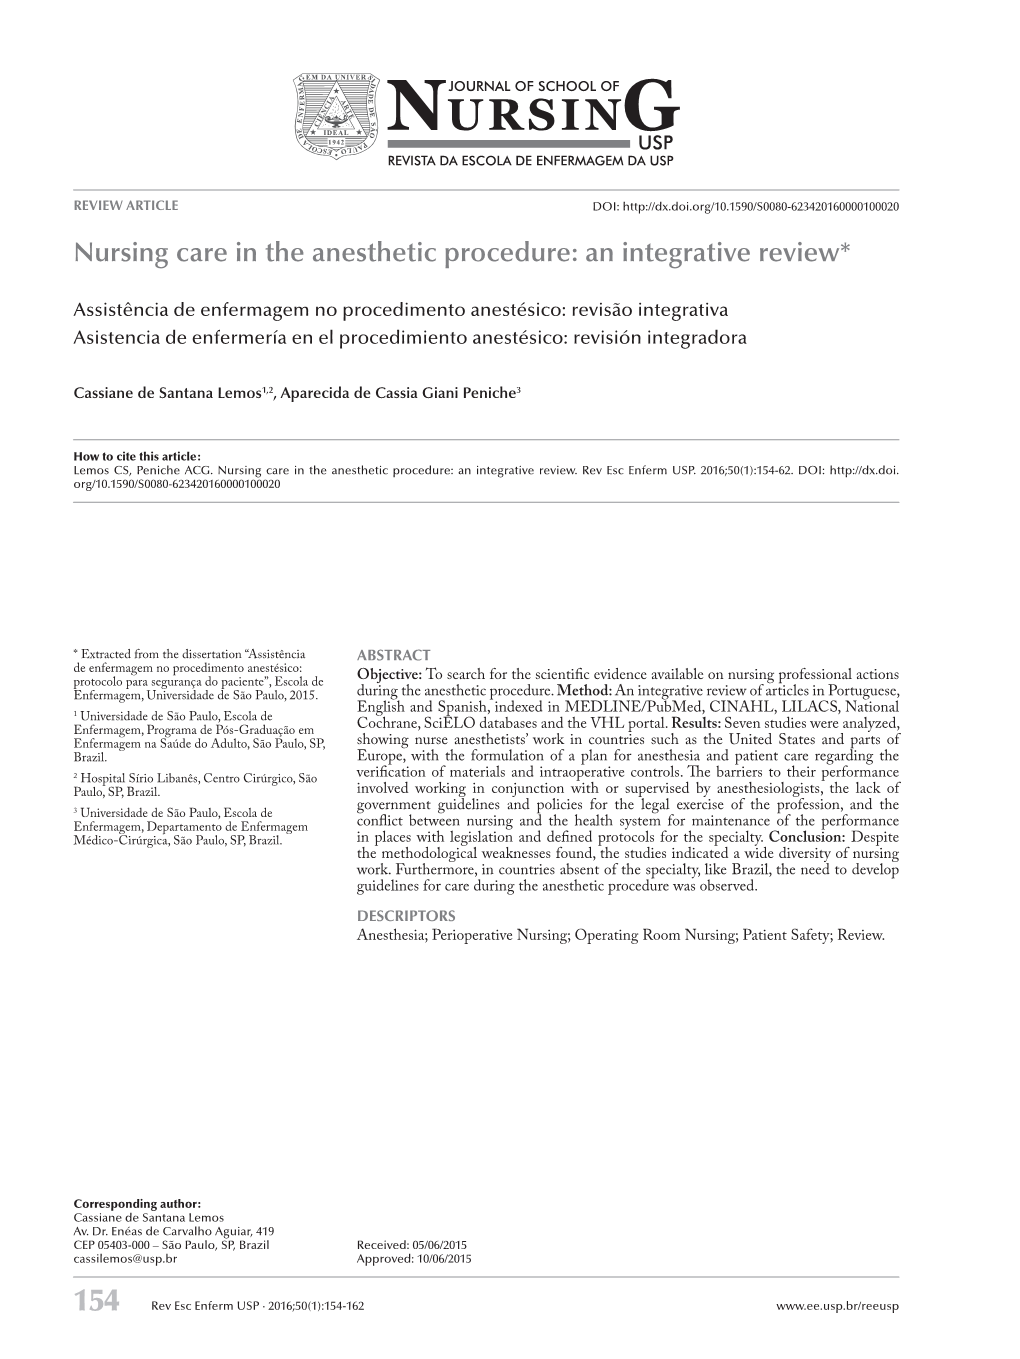 Nursing Care in the Anesthetic Procedure: an Integrative Review*